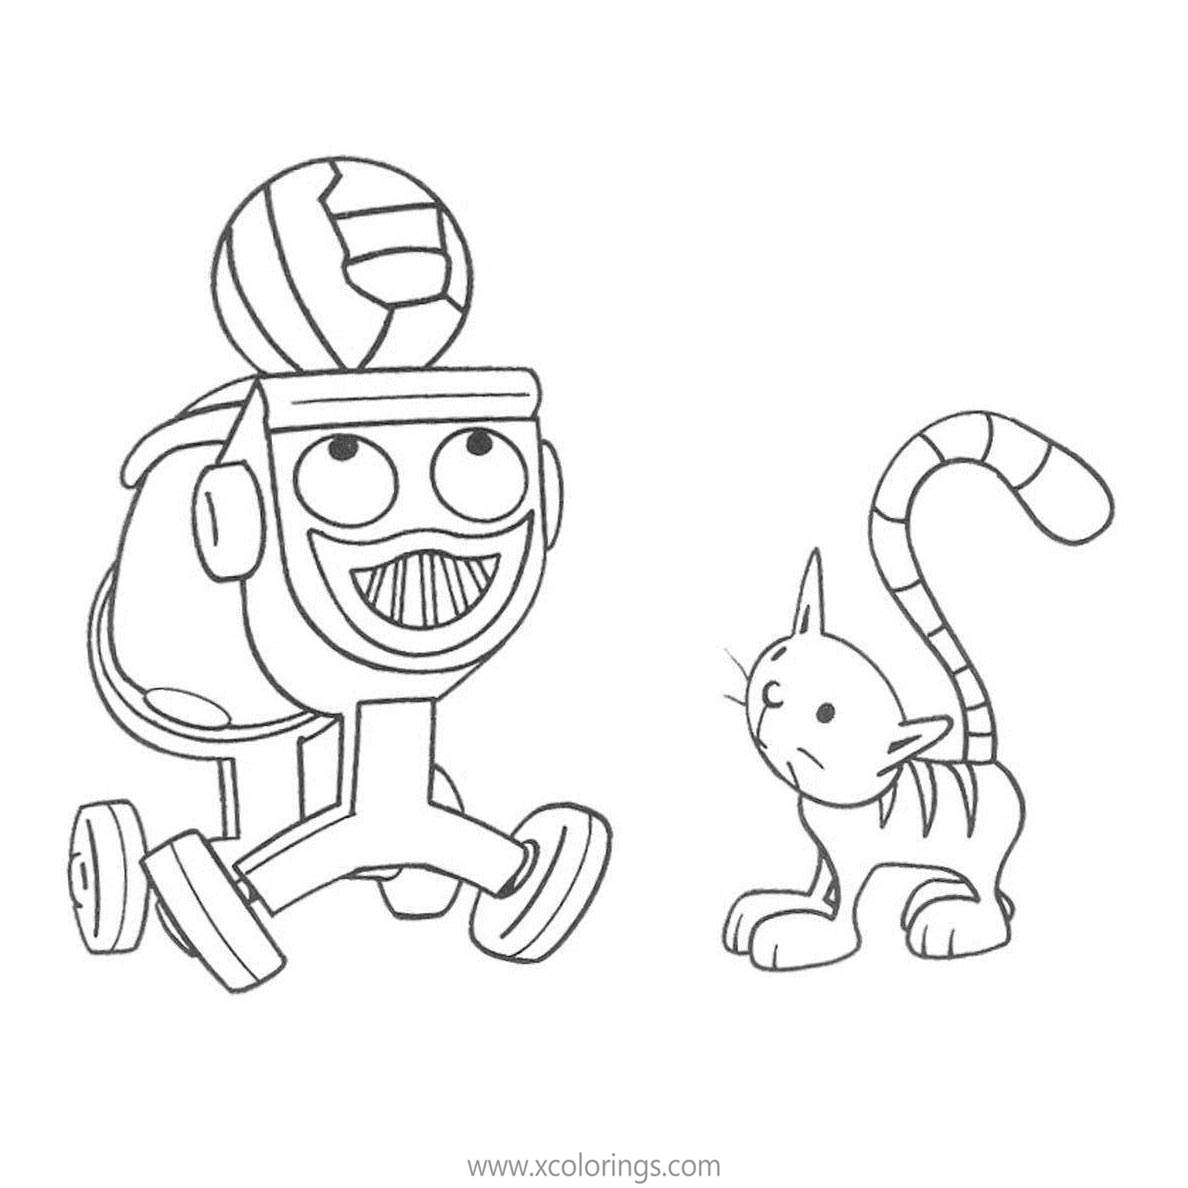 Free Bob the Builder Coloring Pages Dizzy is Playing a Ball printable